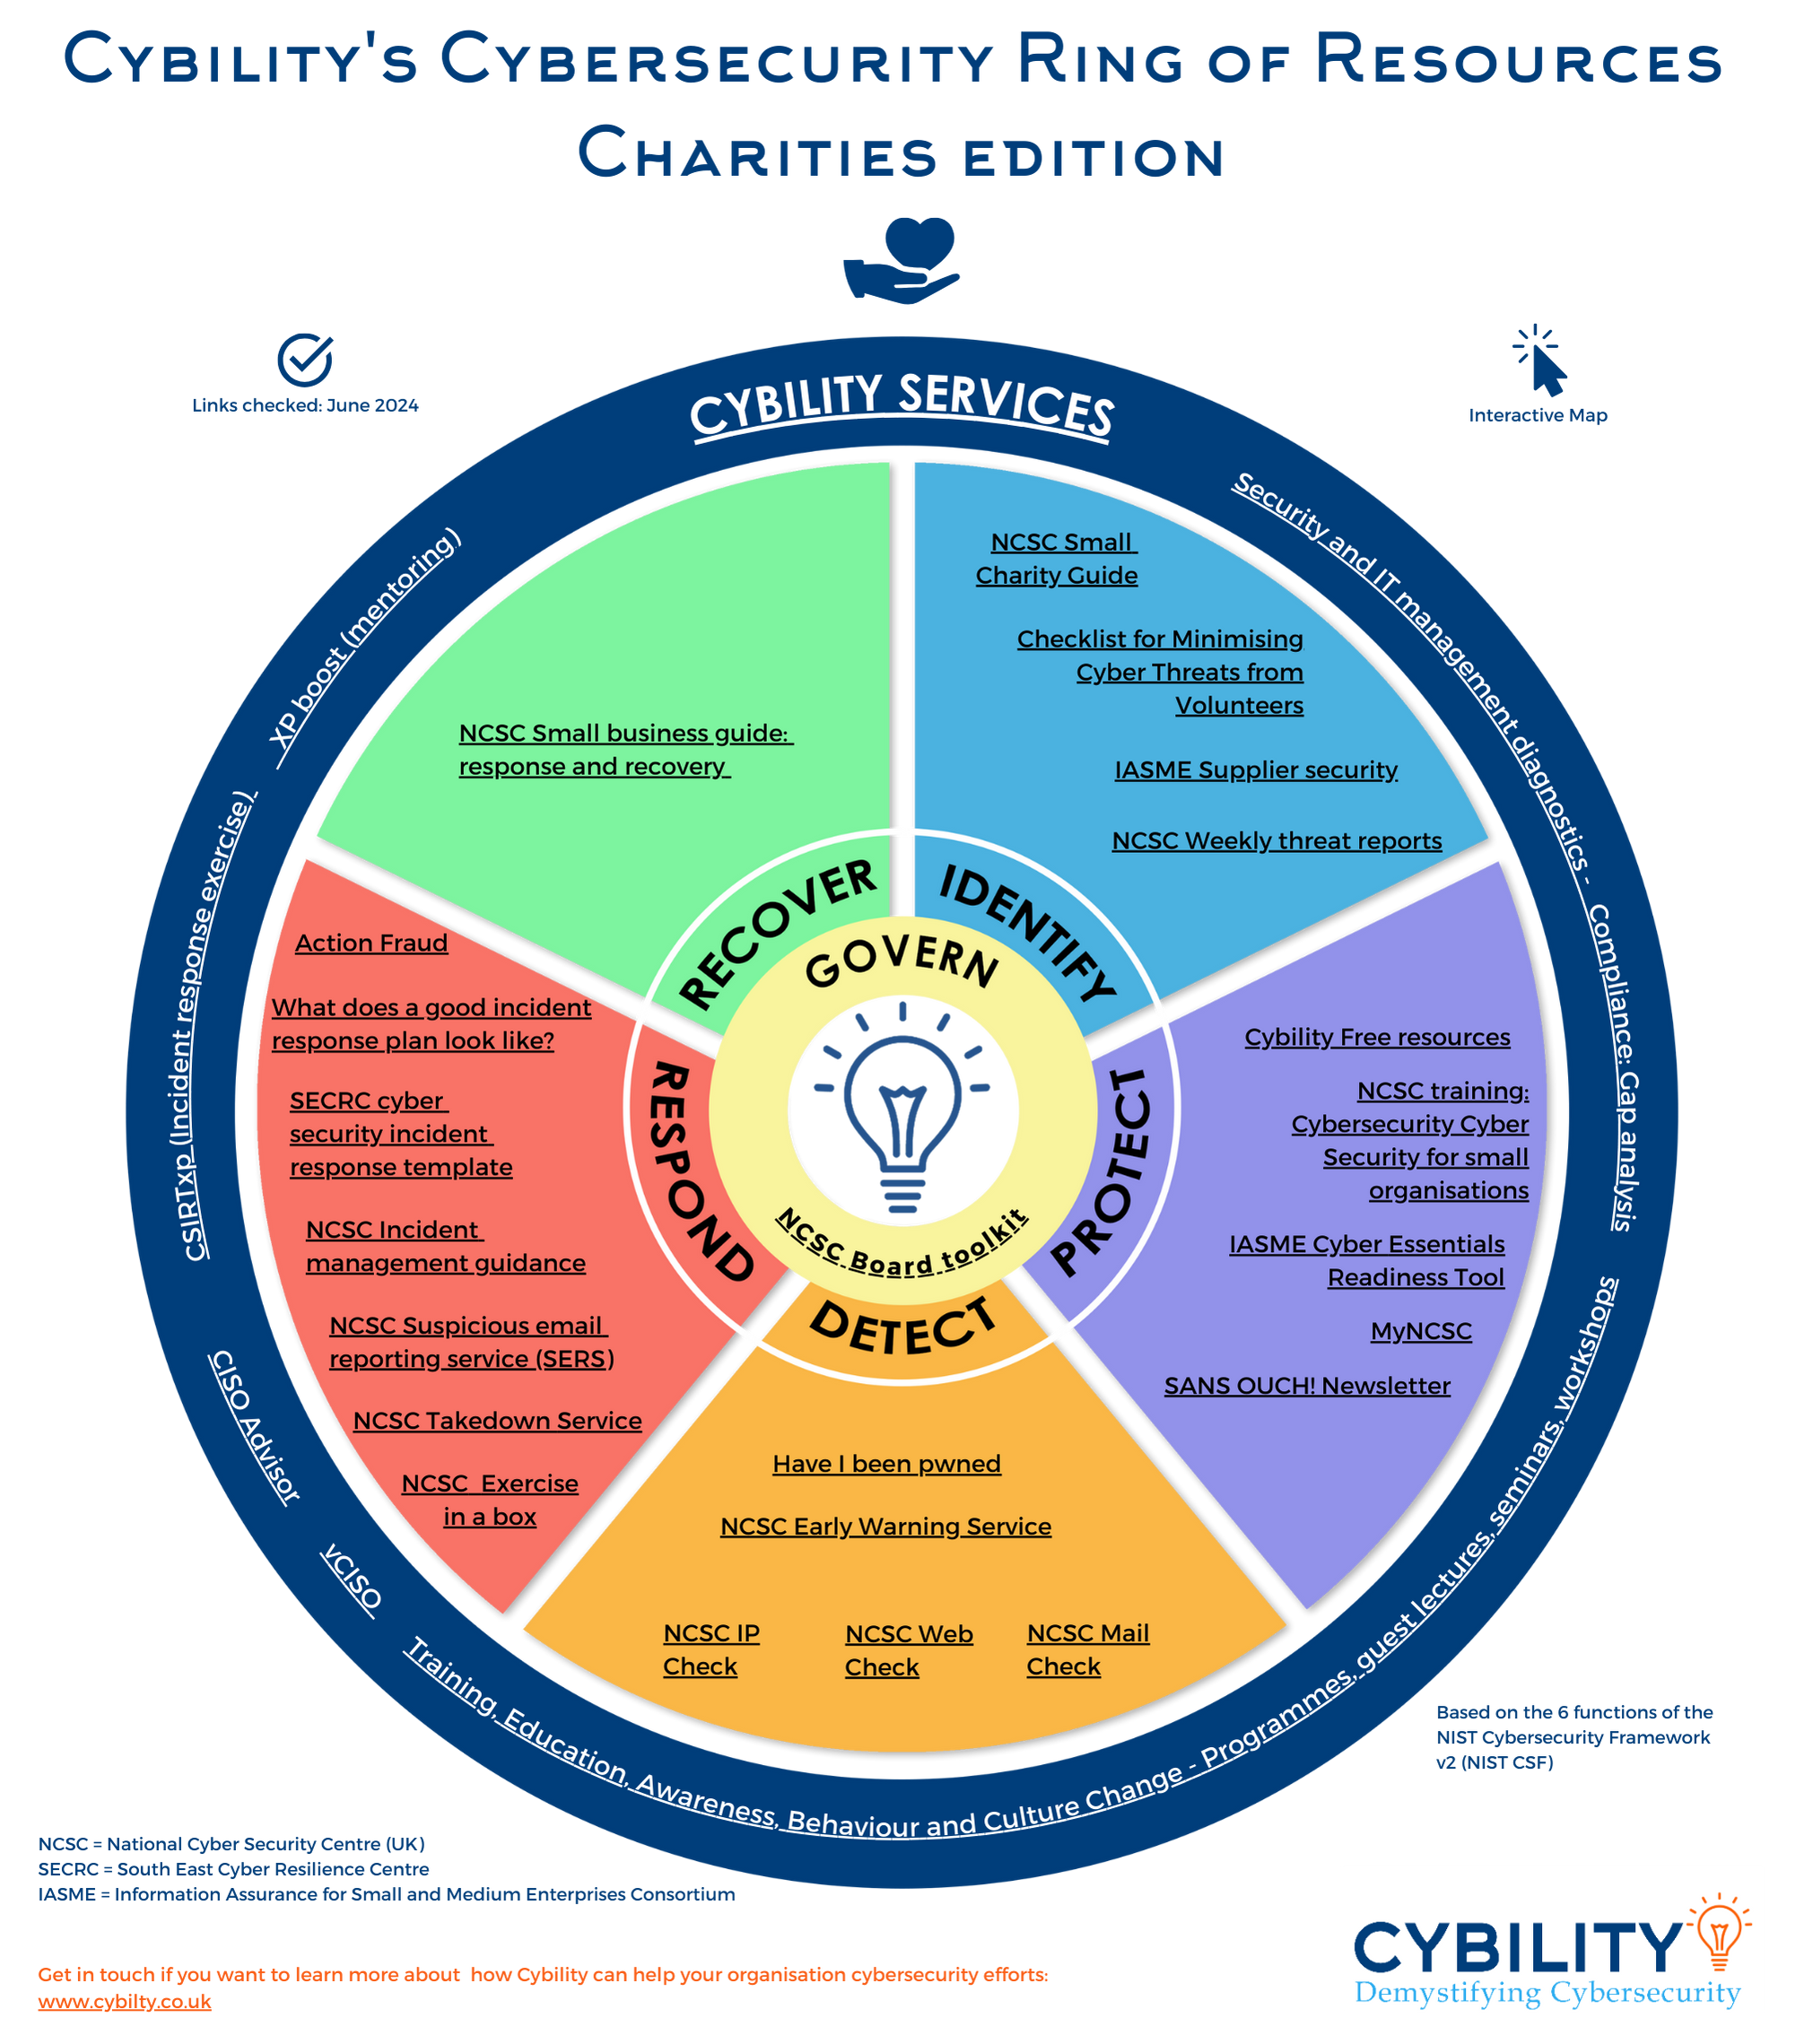 Infographic titled 'Cybility's Cybersecurity Ring of Resources: Charities Edition.' The graphic is a circular diagram divided into five colored segments labeled 'Identify,' 'Protect,' 'Detect,' 'Respond,' and 'Recover,' with a central segment labeled 'Govern.' Each segment lists various resources:  Identify: NCSC Small Charity Guide, Checklist for Minimising Cyber Threats from Volunteers, IASME Supplier security, NCSC Weekly threat reports. Protect: Cybility Free resources, NCSC training, Cybersecurity Cyber Security for small organisations, IASME Cyber Essentials Readiness Tool, MyNCSC, SANS OUCH! Newsletter. Detect: Have I been pwned, NCSC Early Warning Service, NCSC IP Check, NCSC Web Check, NCSC Mail Check. Respond: Action Fraud, What does a good incident response plan look like?, SECRC cyber security incident response template, NCSC Incident management guidance, NCSC Suspicious email reporting service (SERS), NCSC Takedown Service, NCSC Exercise in a box. Recover: NCSC Small business guide, response and recovery. The outer ring mentions Cybility Services, Security and IT management diagnostics, and Compliance gap analysis. The infographic also features the Cybility logo and a call to action to get in touch for more information on how Cybility can help with organizational cybersecurity efforts. The links were checked as of June 2024.